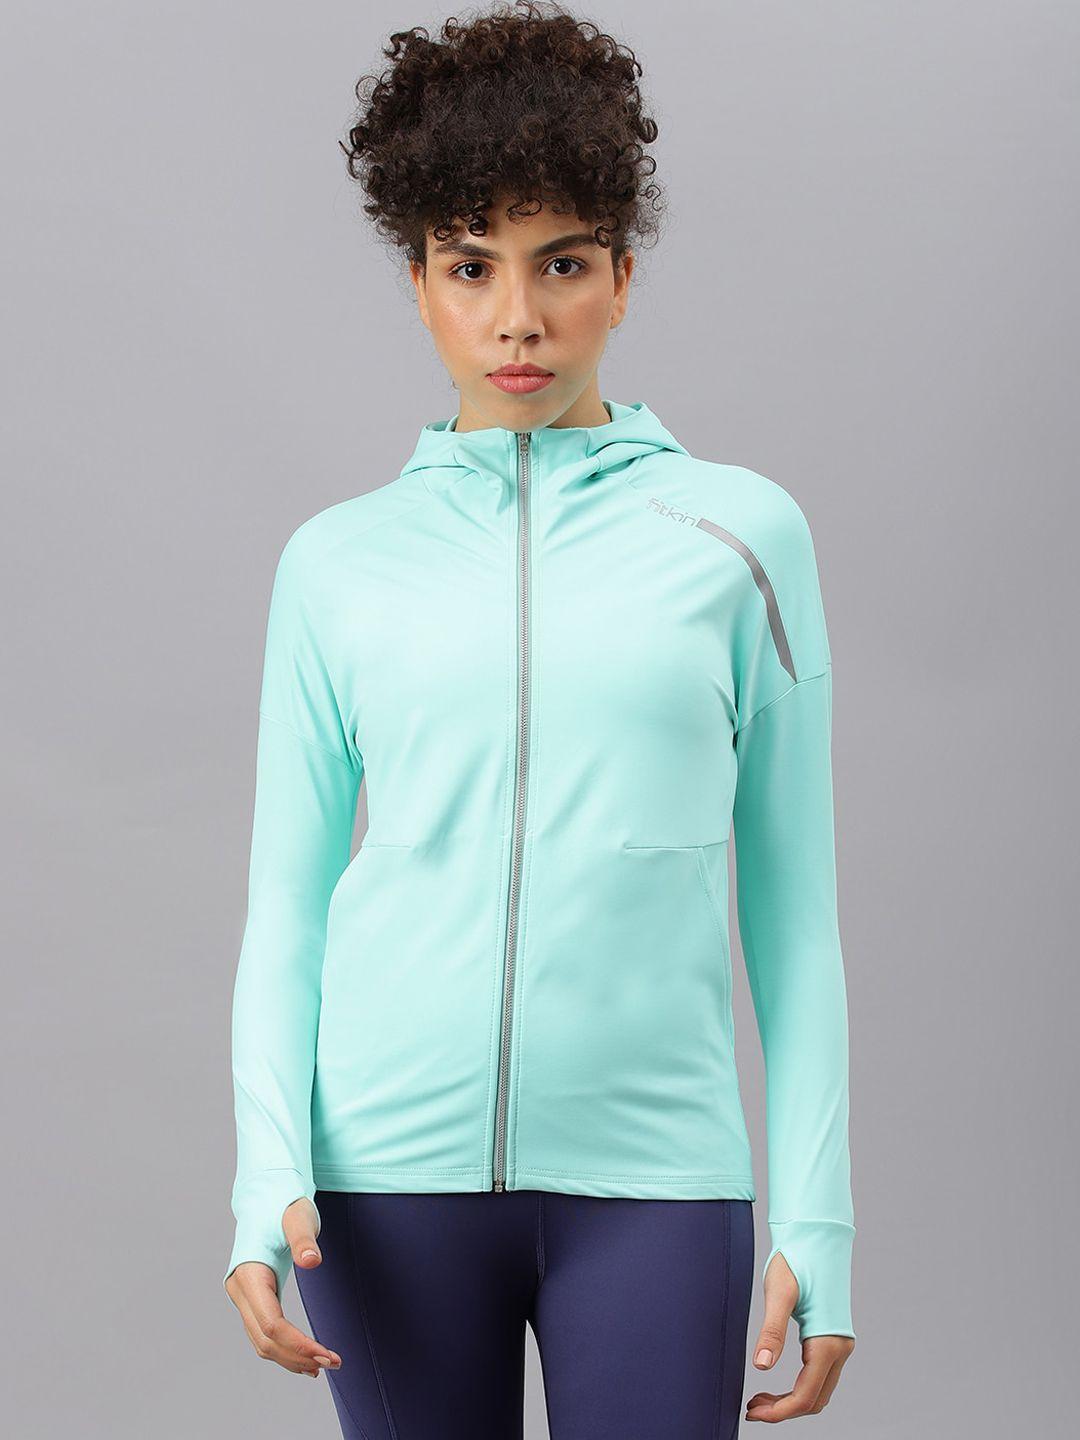 fitkin women lightweight training or gym sporty jacket